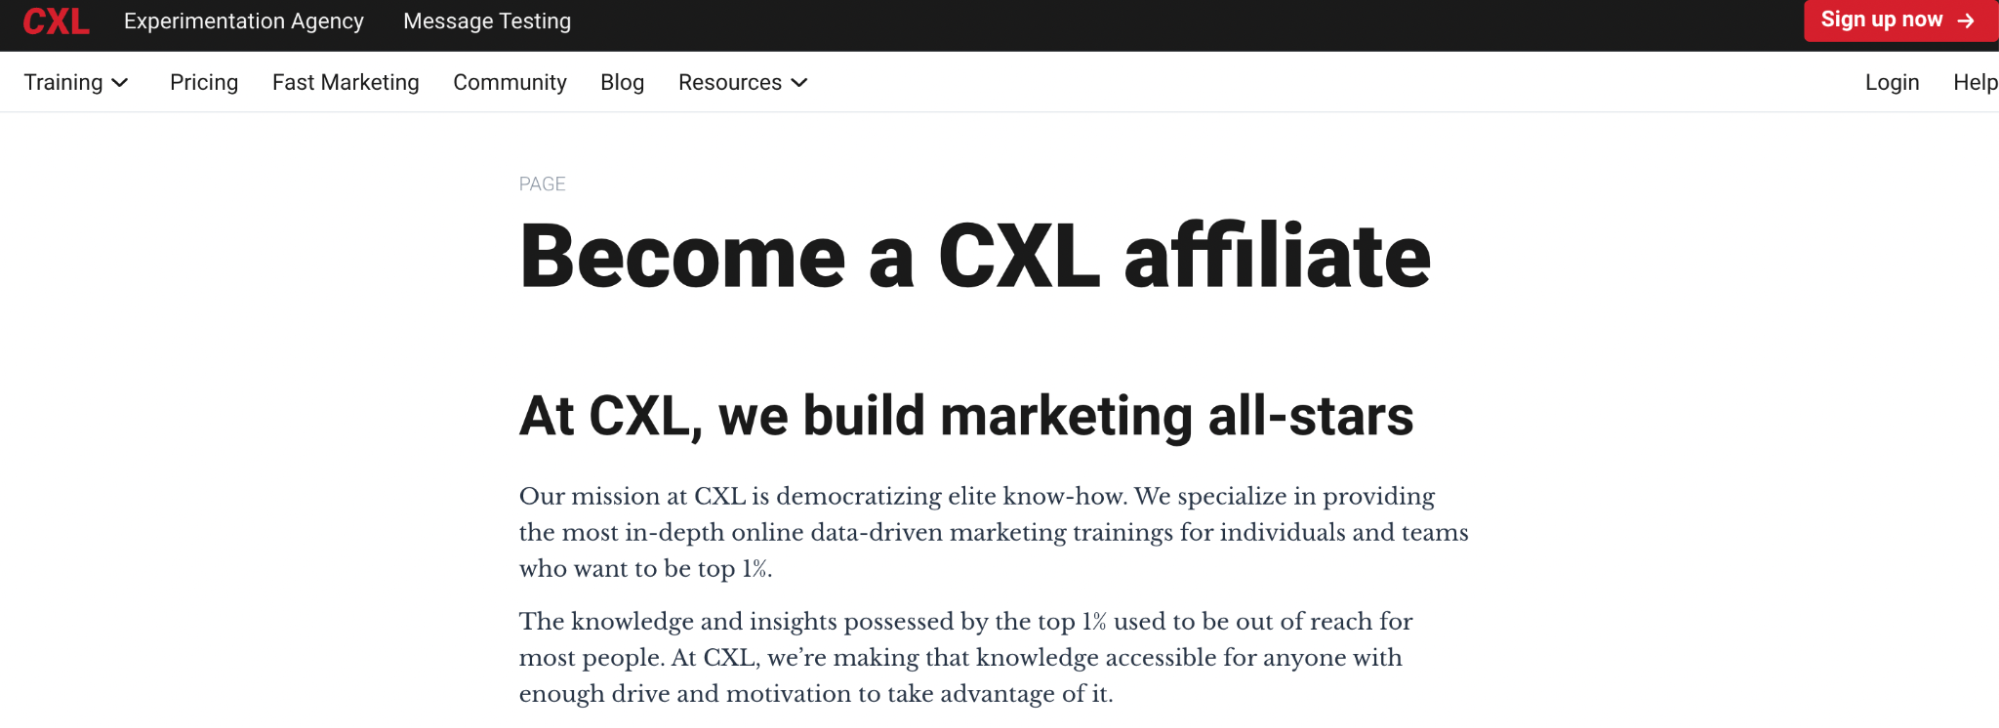 CXL’s affiliate program for marketing courses and minidegrees